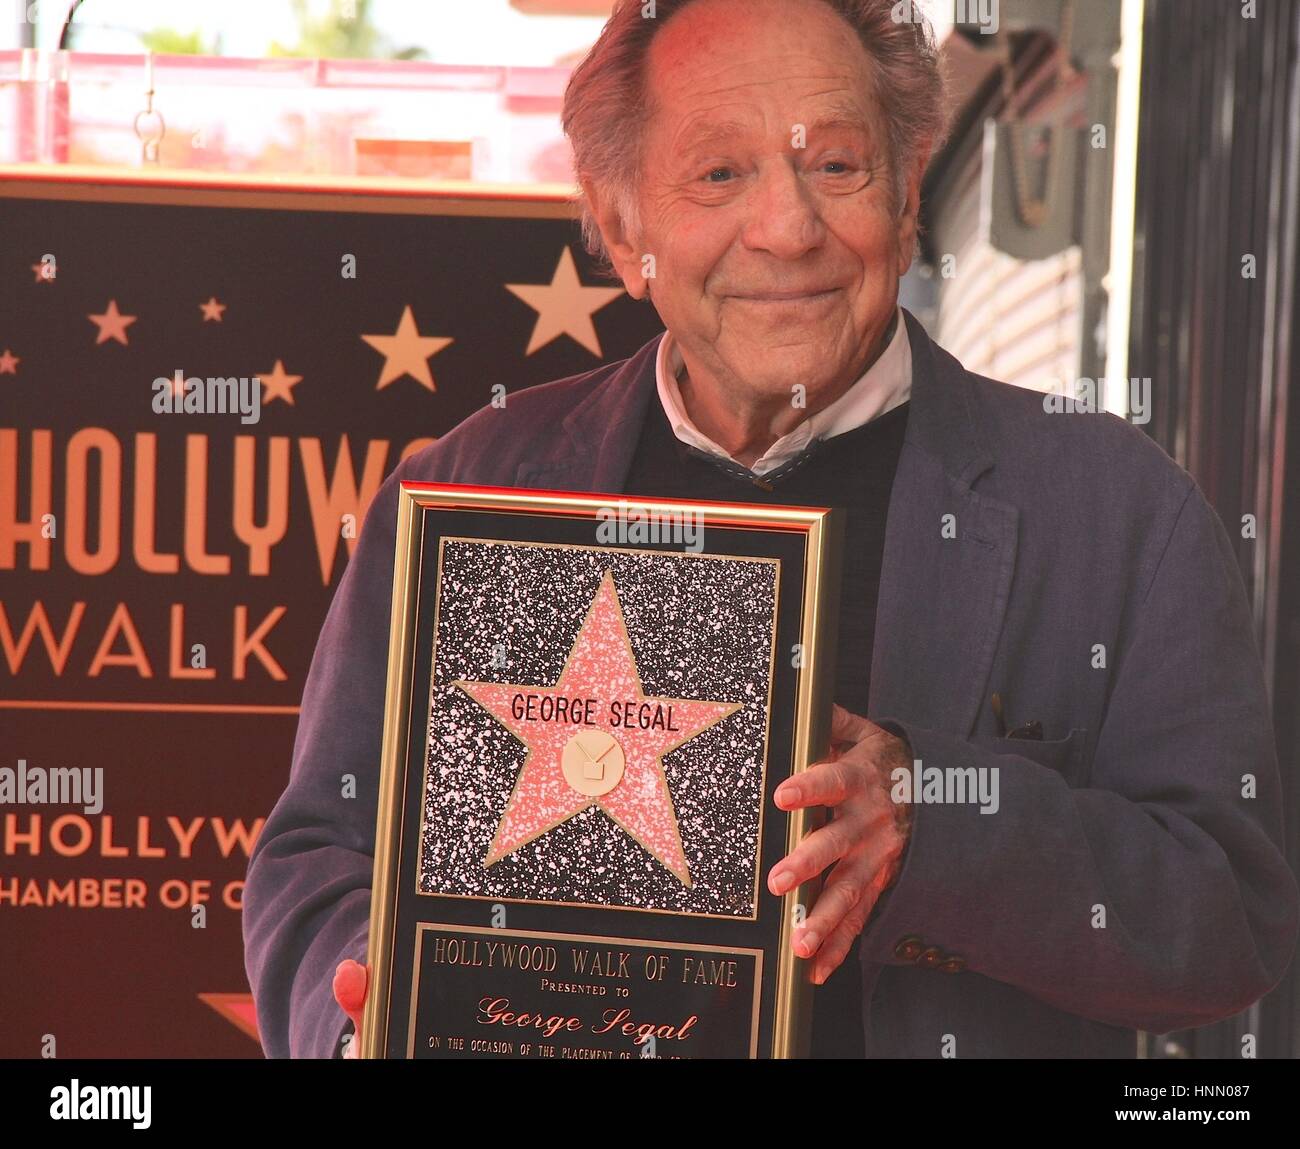 Hollywood, California, USA. 13th Feb, 2017. I15880CHW.George Segal Honored With Star On The Hollywood Walk Of Fame .6433 Hollywood Blvd in Front Of Historic Pacific Theatre, Hollywood, CA.02/14/2017.GEORGE SEGAL . © Clinton H.Wallace/Photomundo International/ Photos Inc Credit: Clinton Wallace/Globe Photos/ZUMA Wire/Alamy Live News Stock Photo